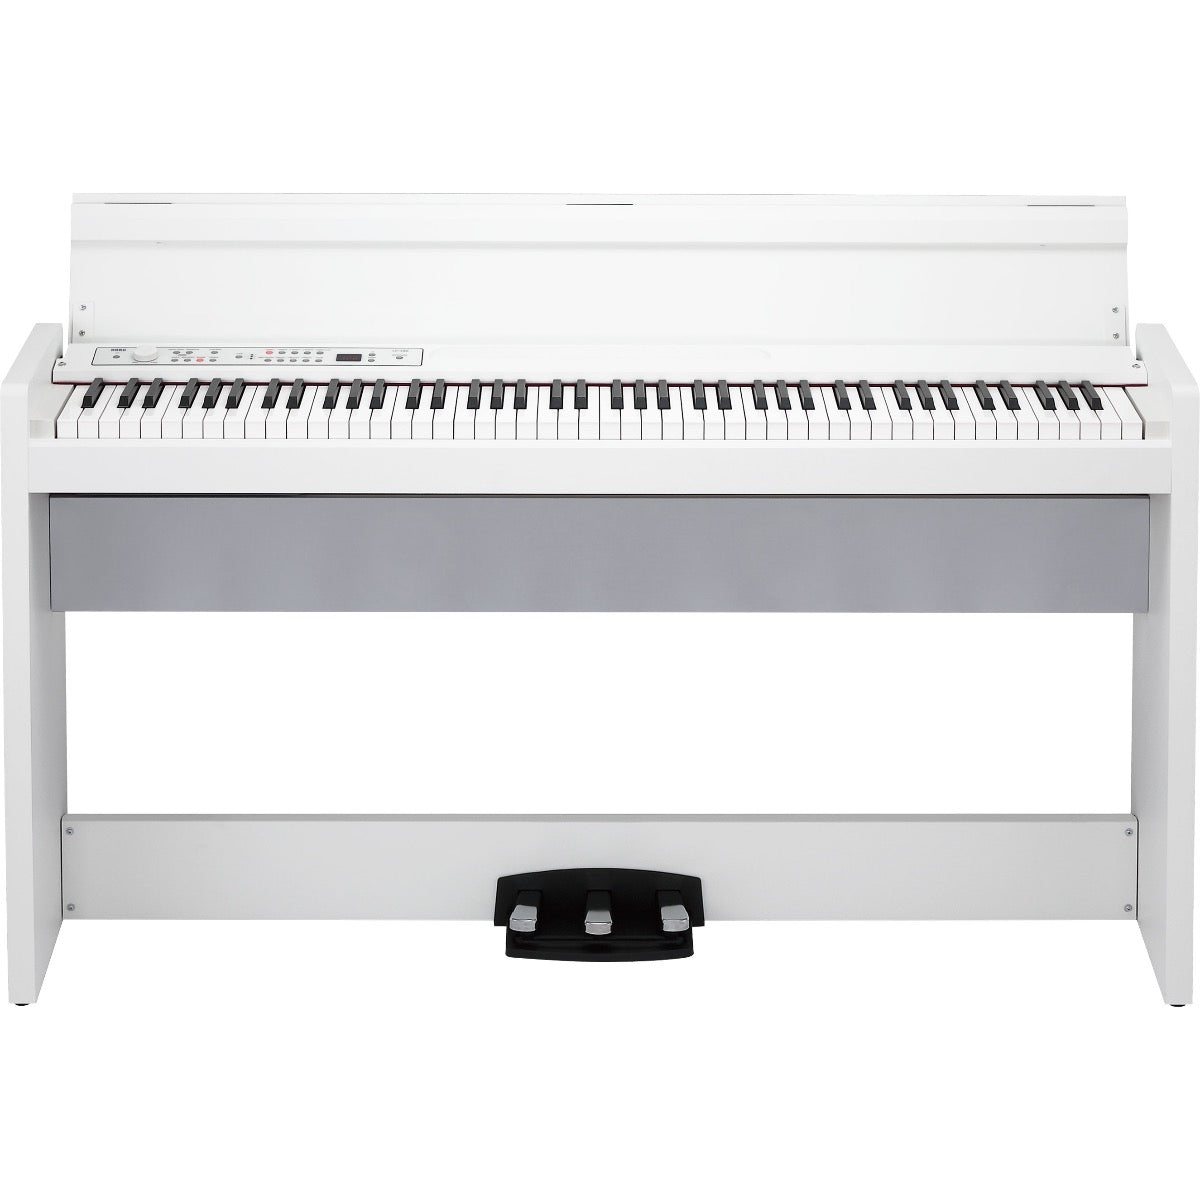 Perspective view of Korg LP-380U Digital Piano - White showing top and front